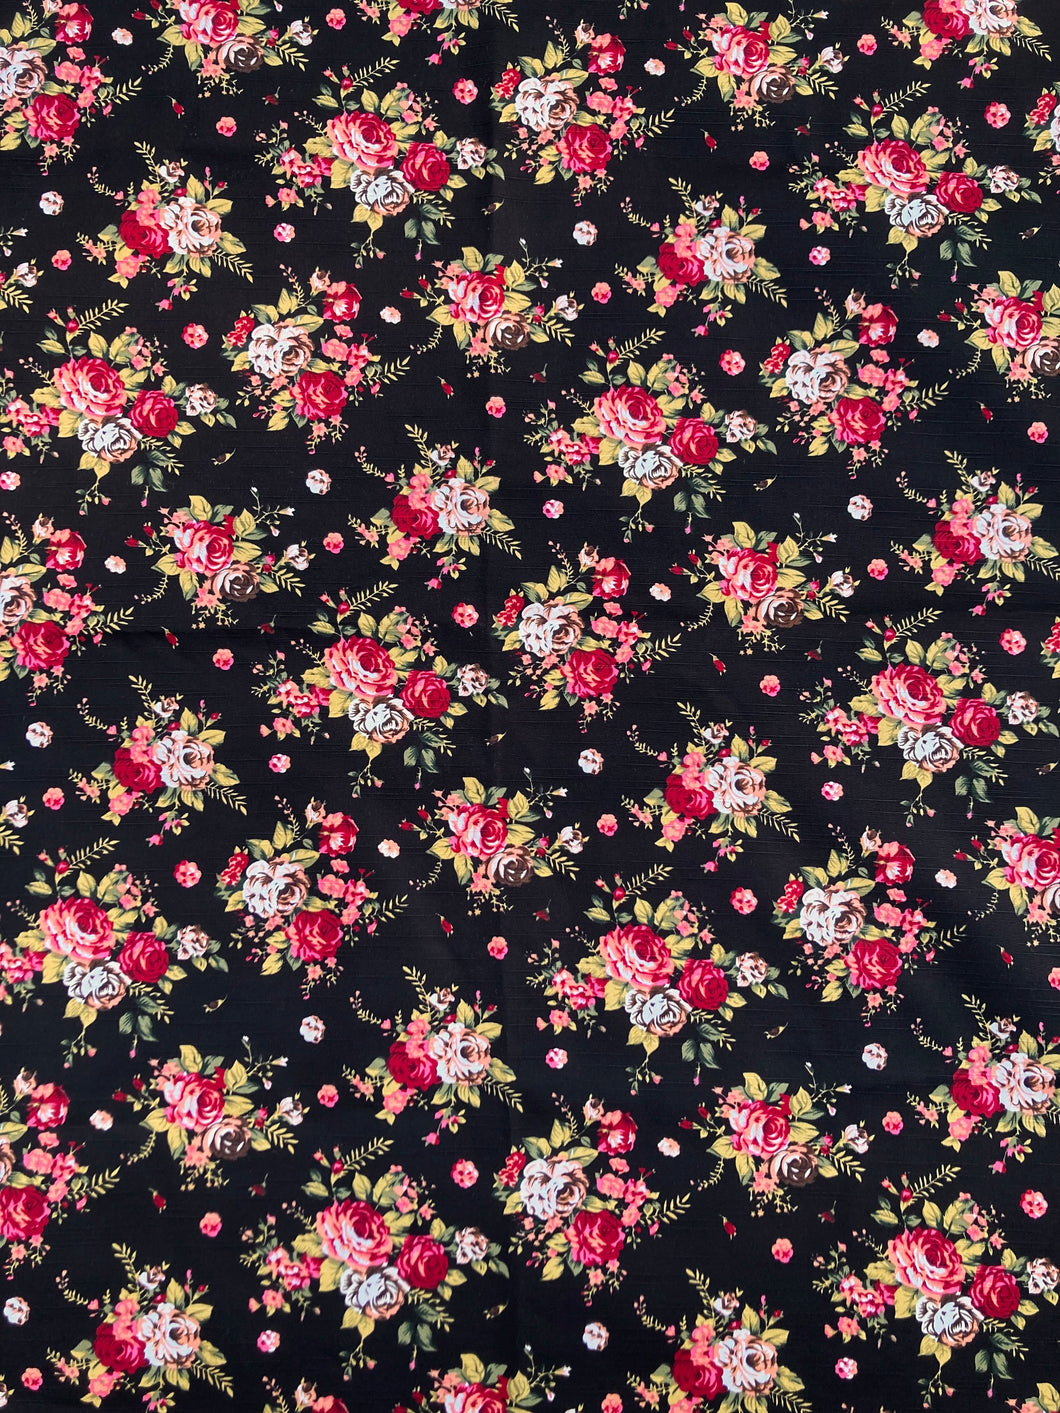 Cotton Sewing Flower Fabric for DIY Custom Sneakers